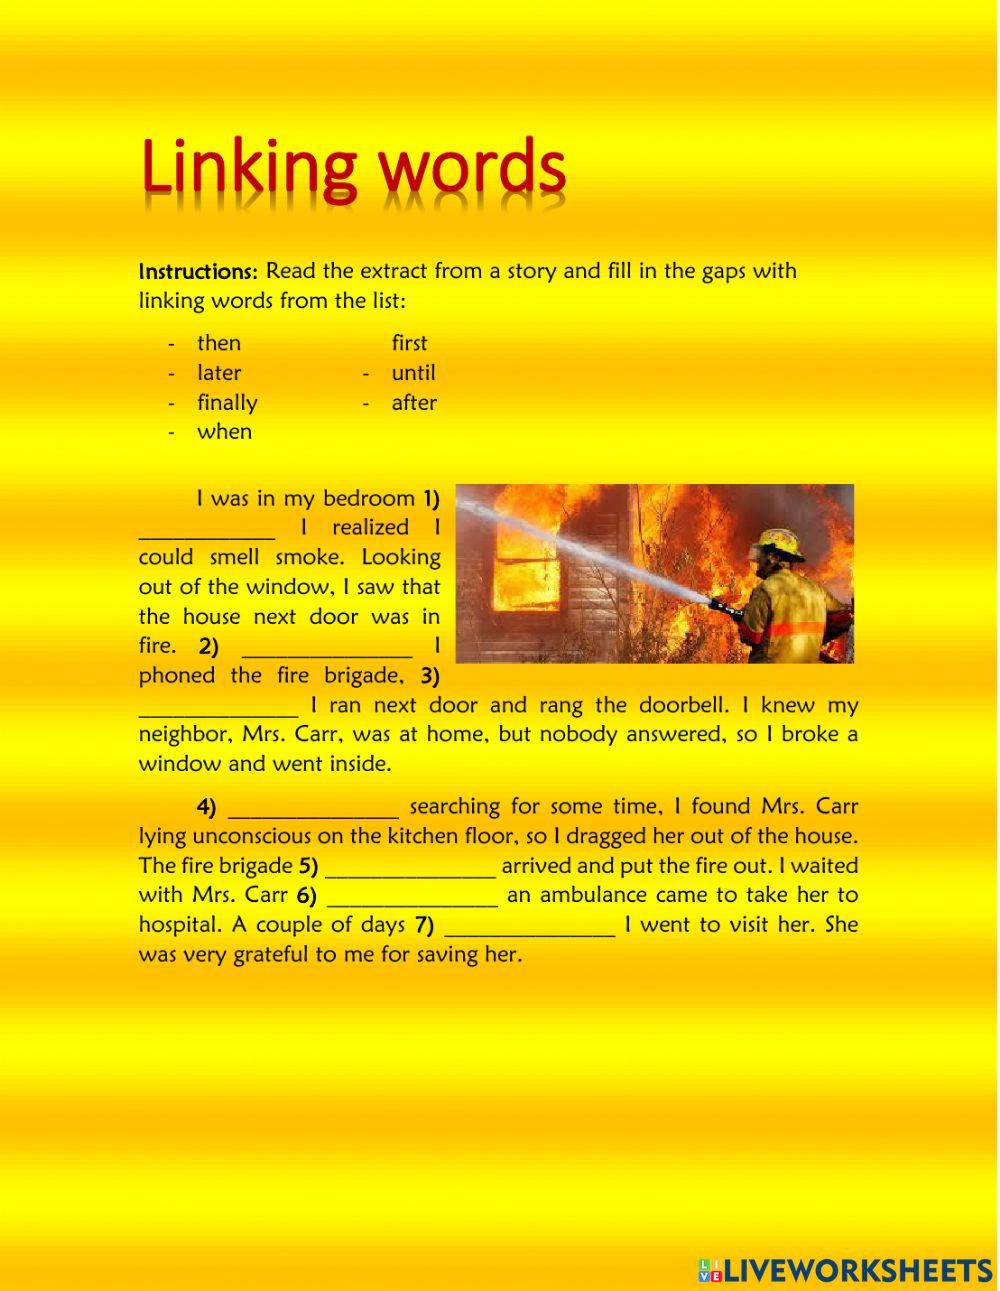 Linking words